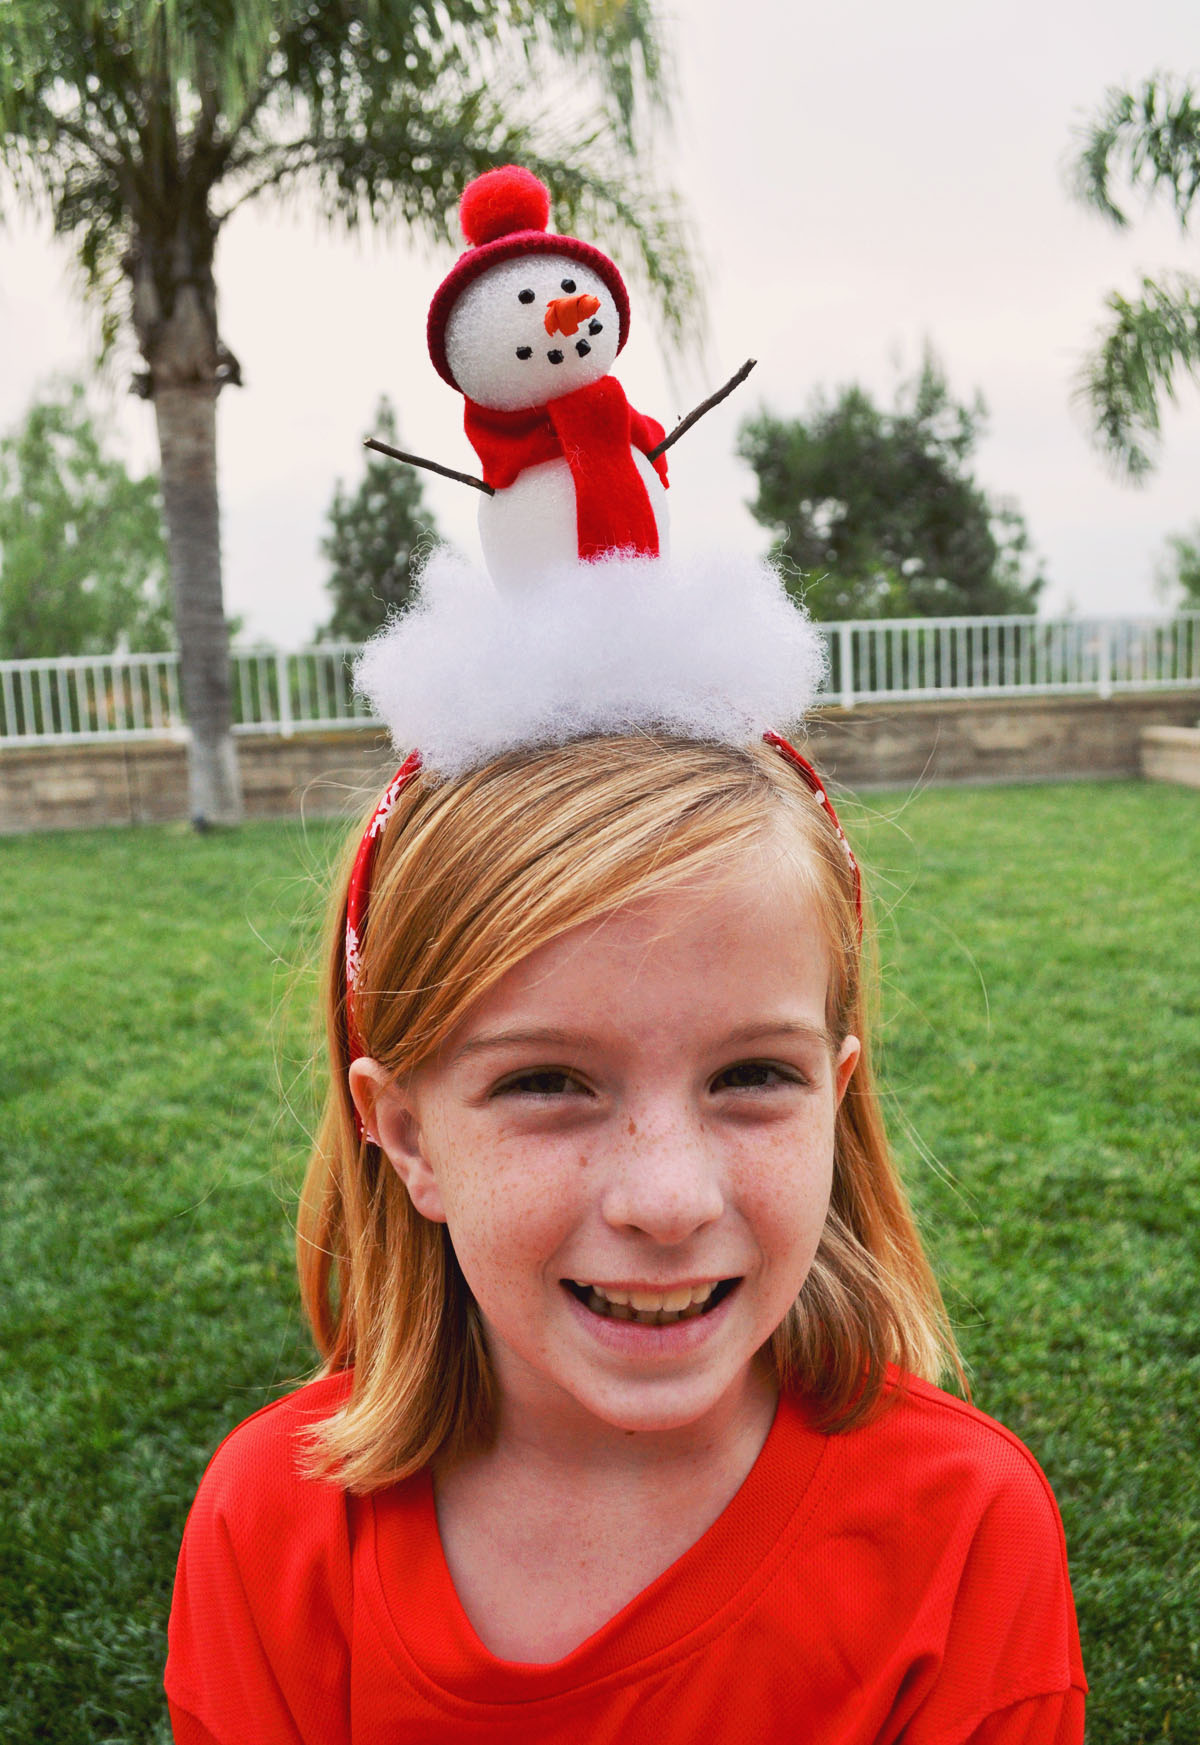 Turn heads with this adorable snowman headband (pun intended) - #CraftyisContagious